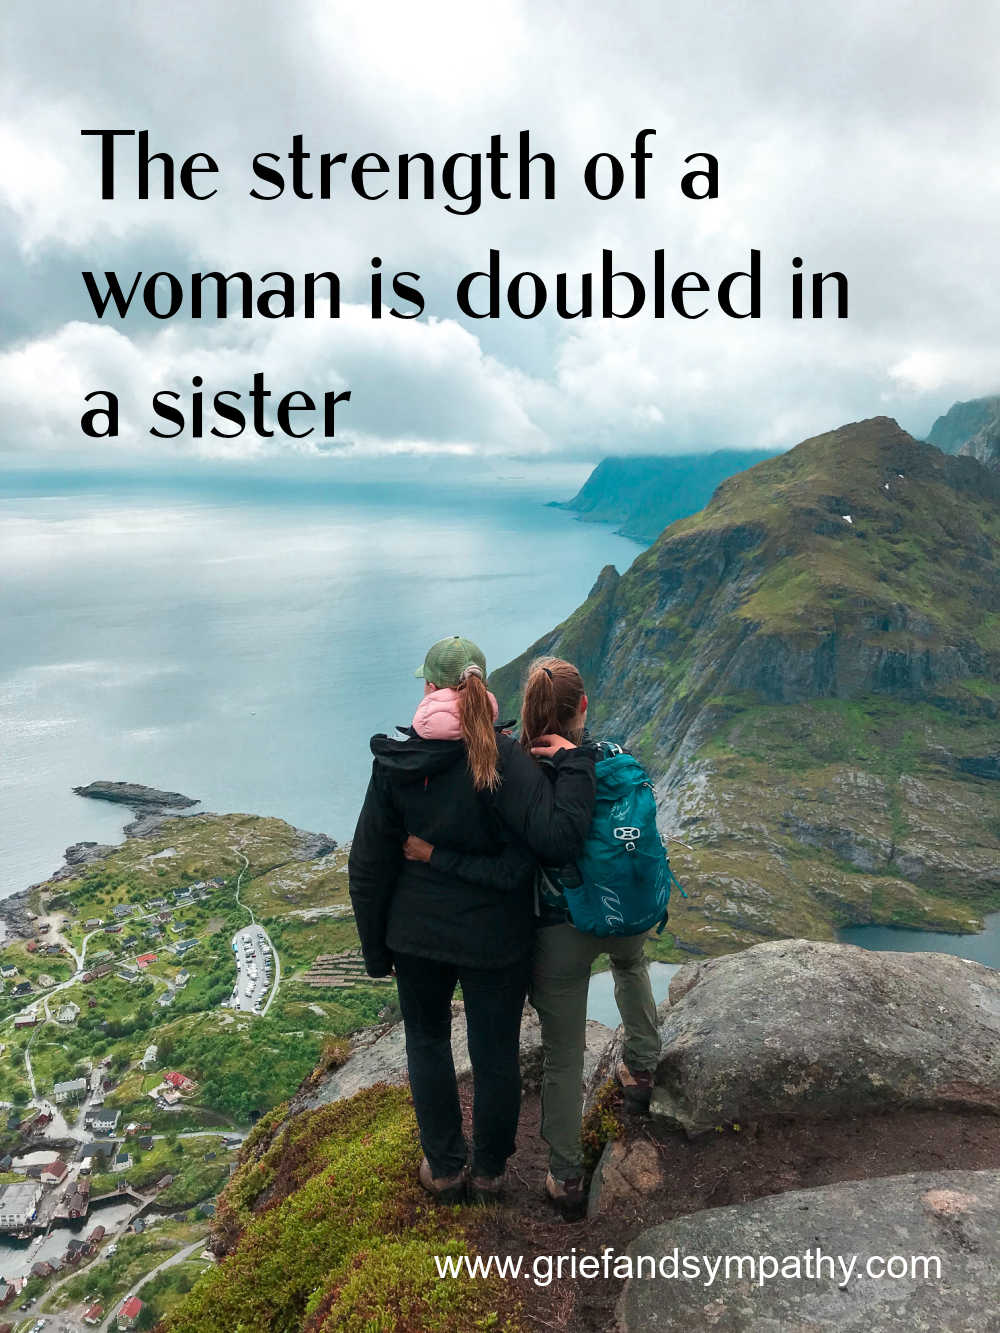 The strength of a woman is doubled in a sister - quote about a sister